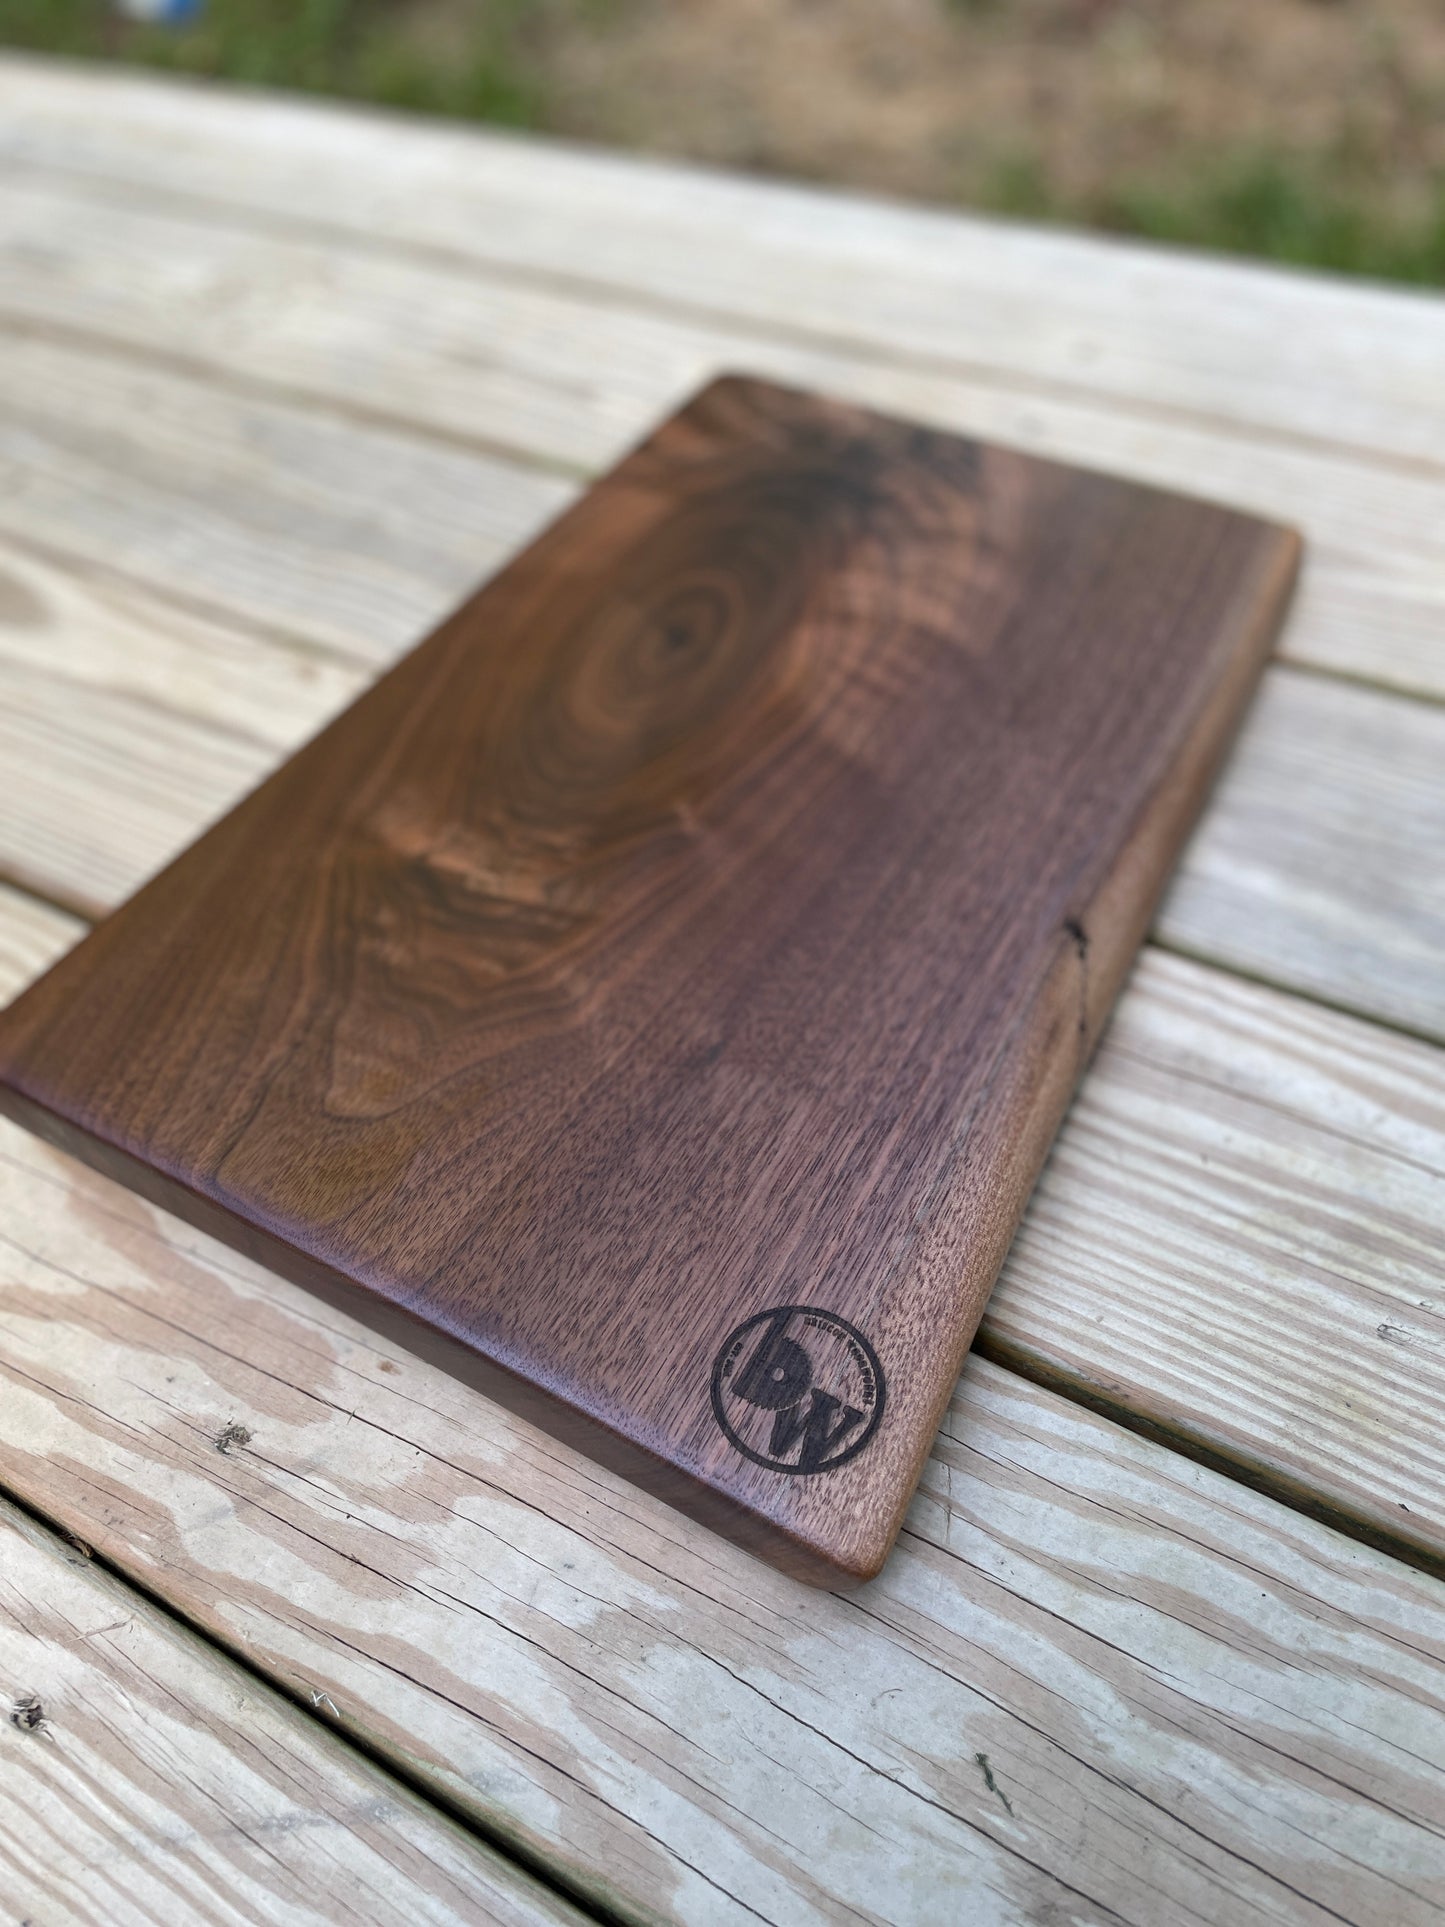 Walnut charcuterie board with knot